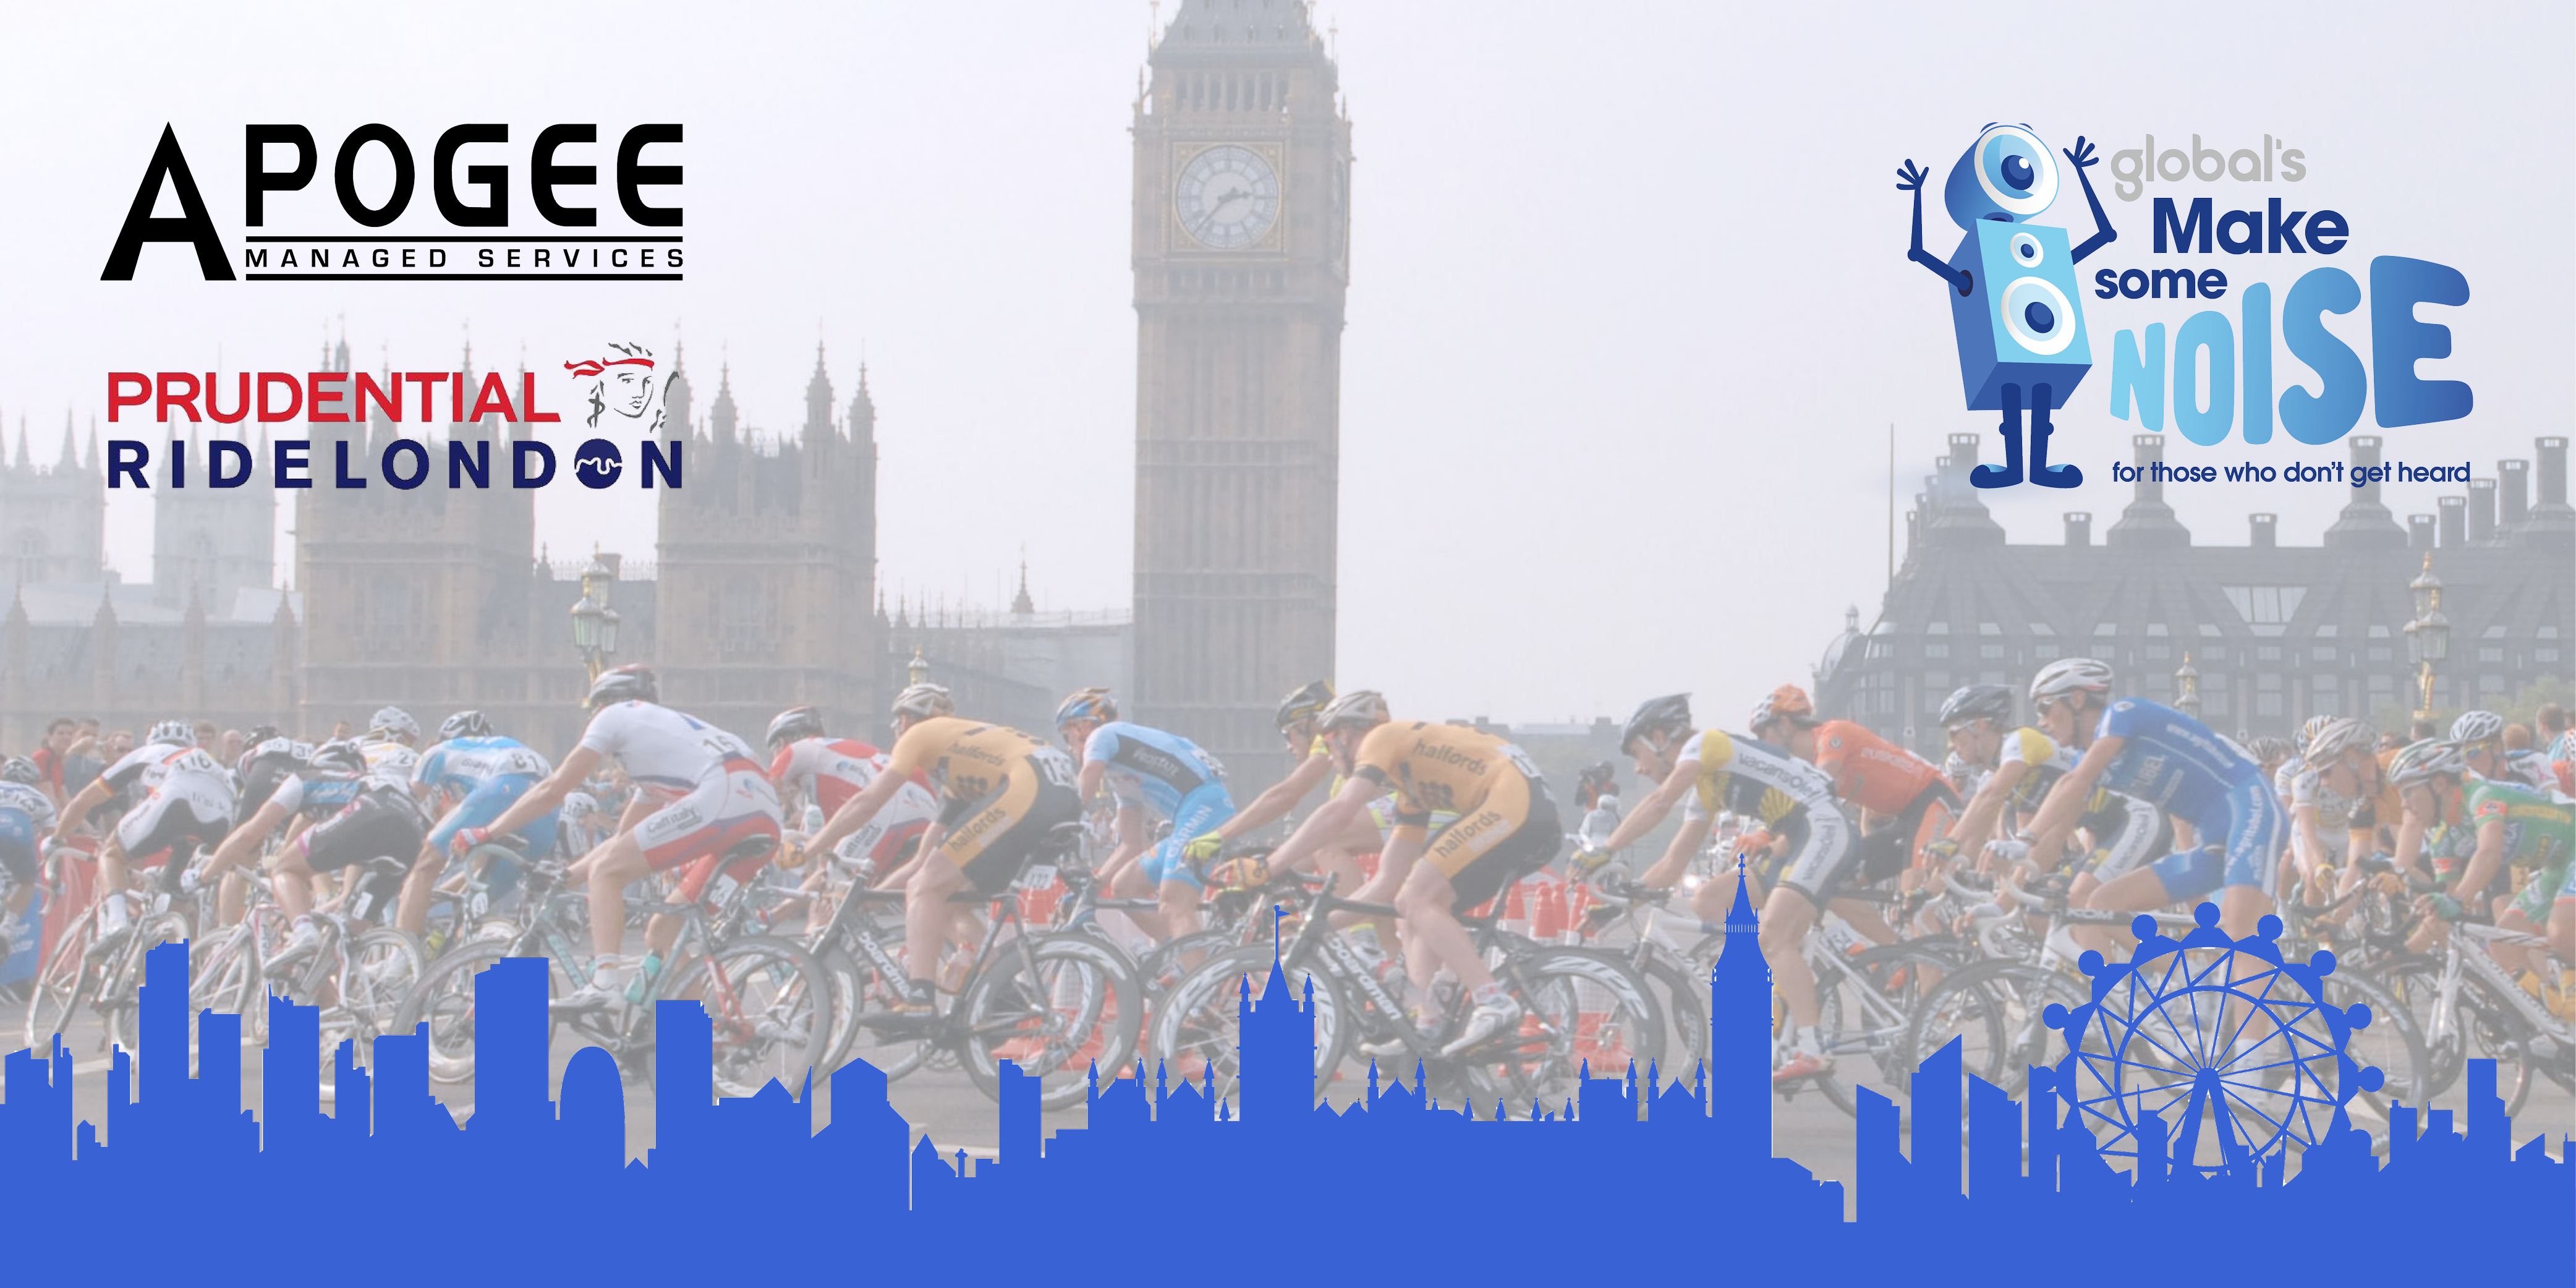 Apogee take on RideLondon 100 to raise £8500 for Global's Make some Noise children's charities